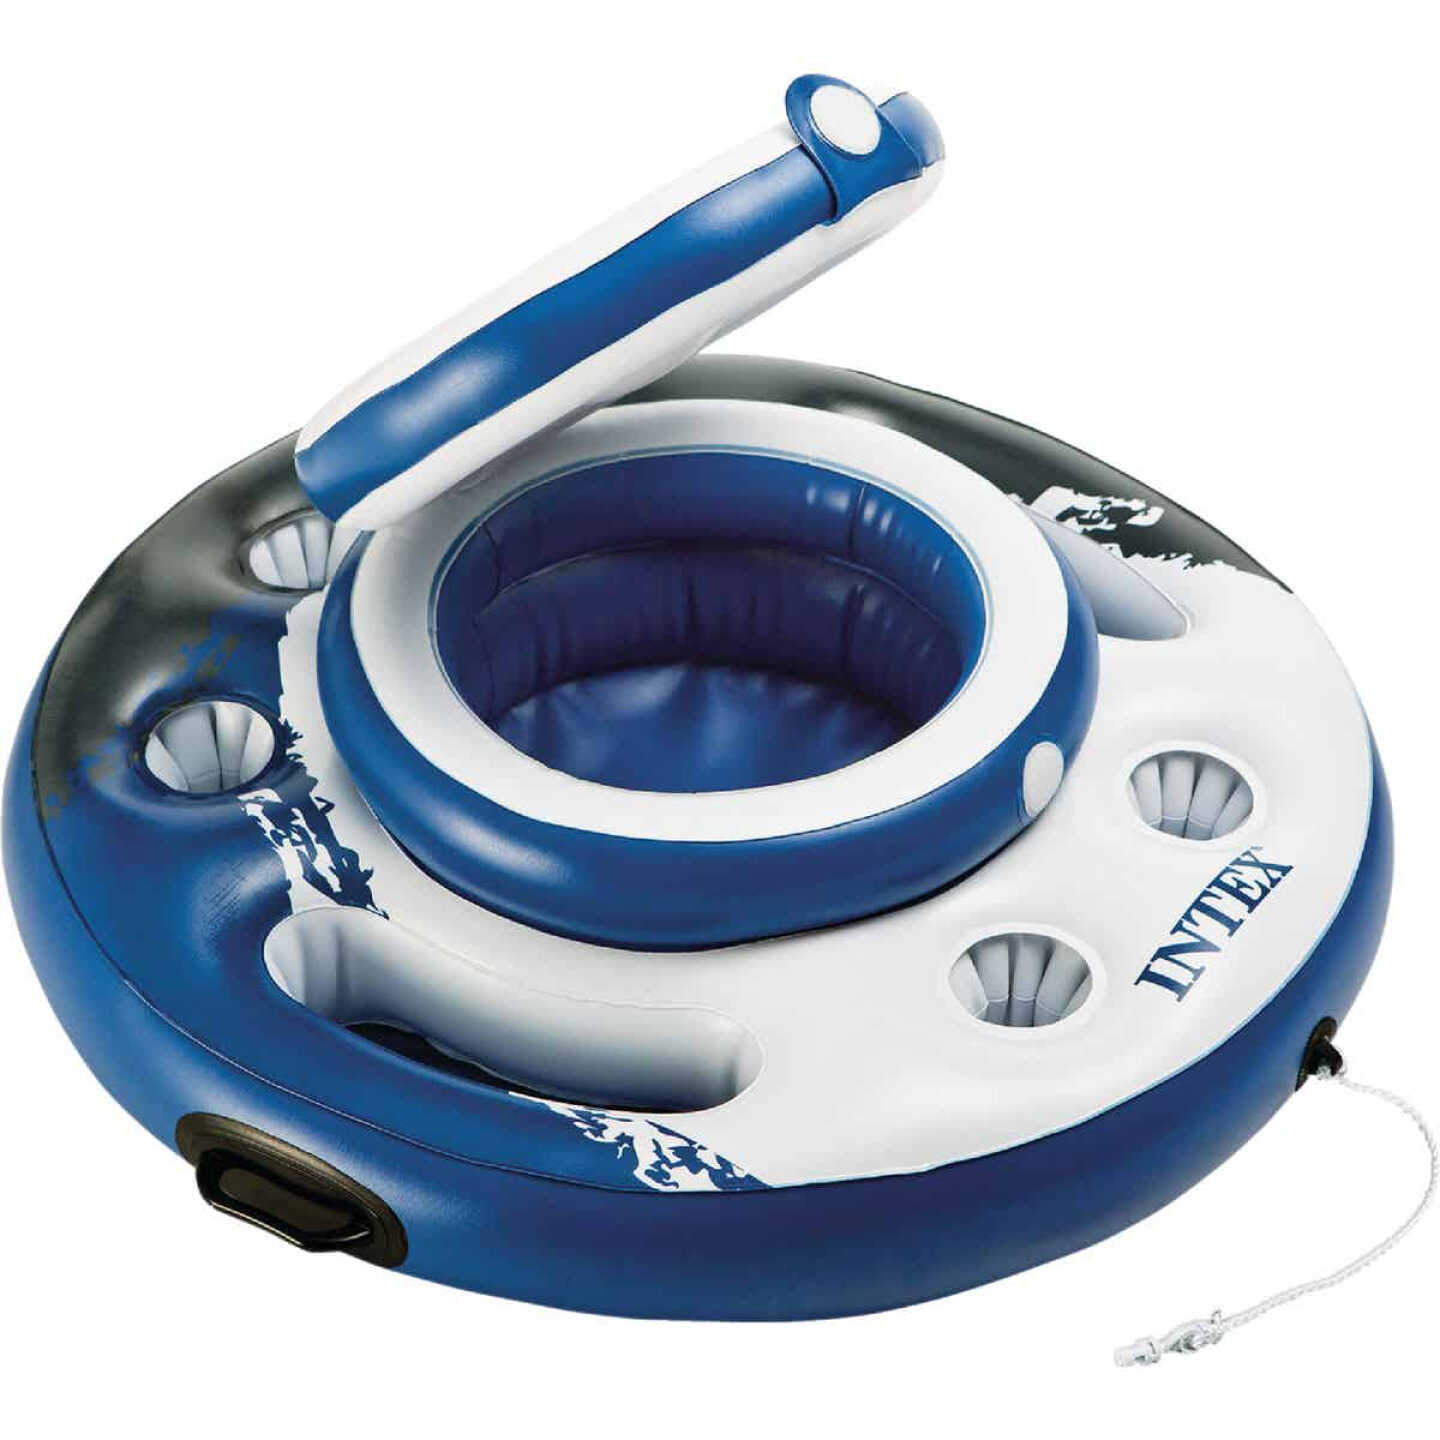 Intex Mega Chill 35 In. Dia. Inflatable Pool Cooler Image 1